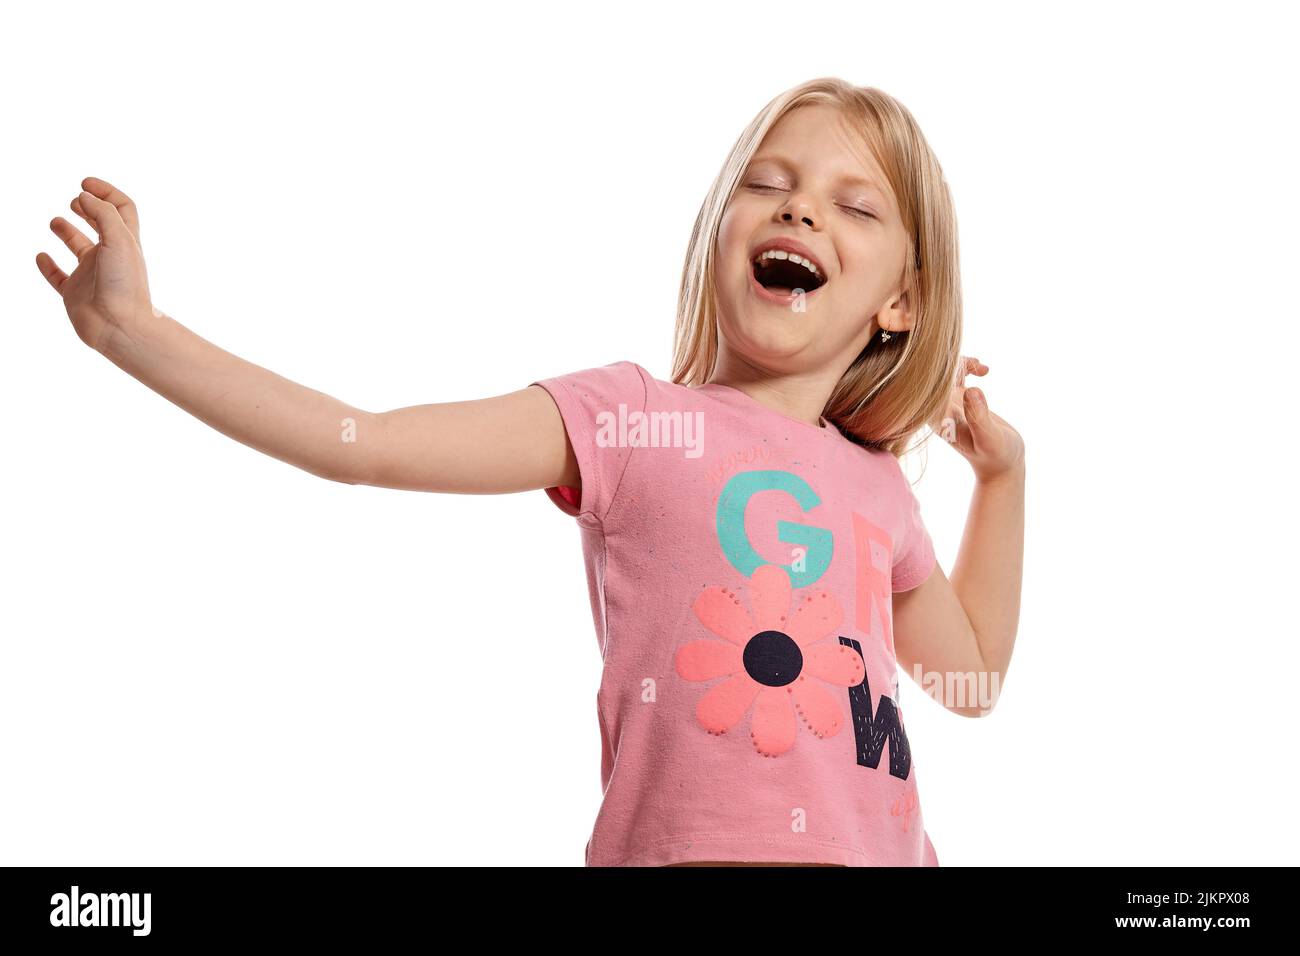 Close-up portrait of a nice blonde little kid in a pink t-shirt posing isolated on white background. Stock Photo